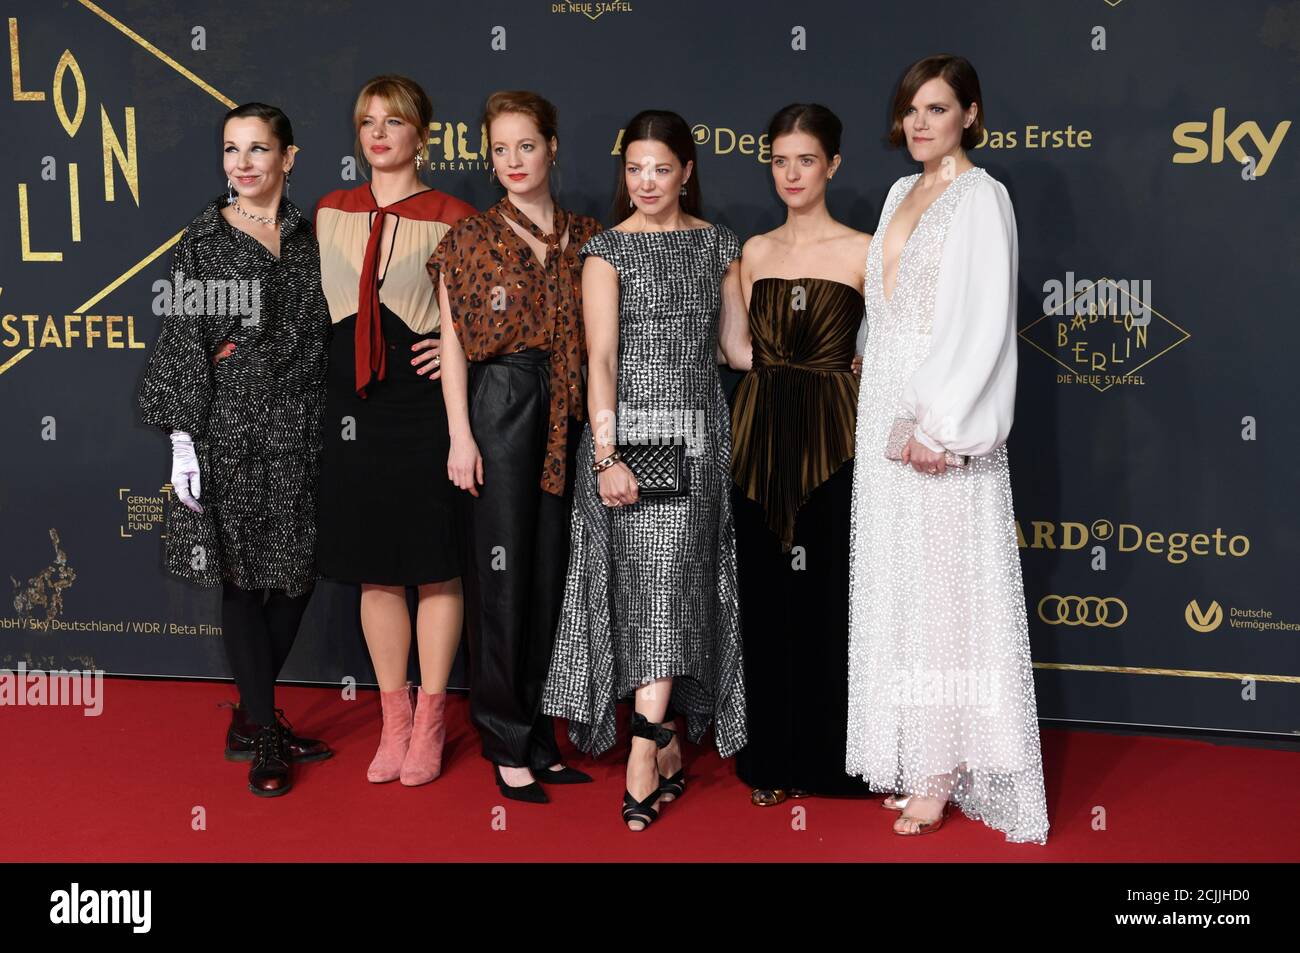 Meret Becker, Jenny Schily, Leonie Benesch, Hannah Herzsprung, Liv Lisa Fries and Fritzi Haberlandt attend the premiere of the third season of 'Babylon Berlin' series in the cinema 'Zoo Palast' in Berlin, Germany, December 16, 2019. REUTERS/Annegret Hilse Stock Photo